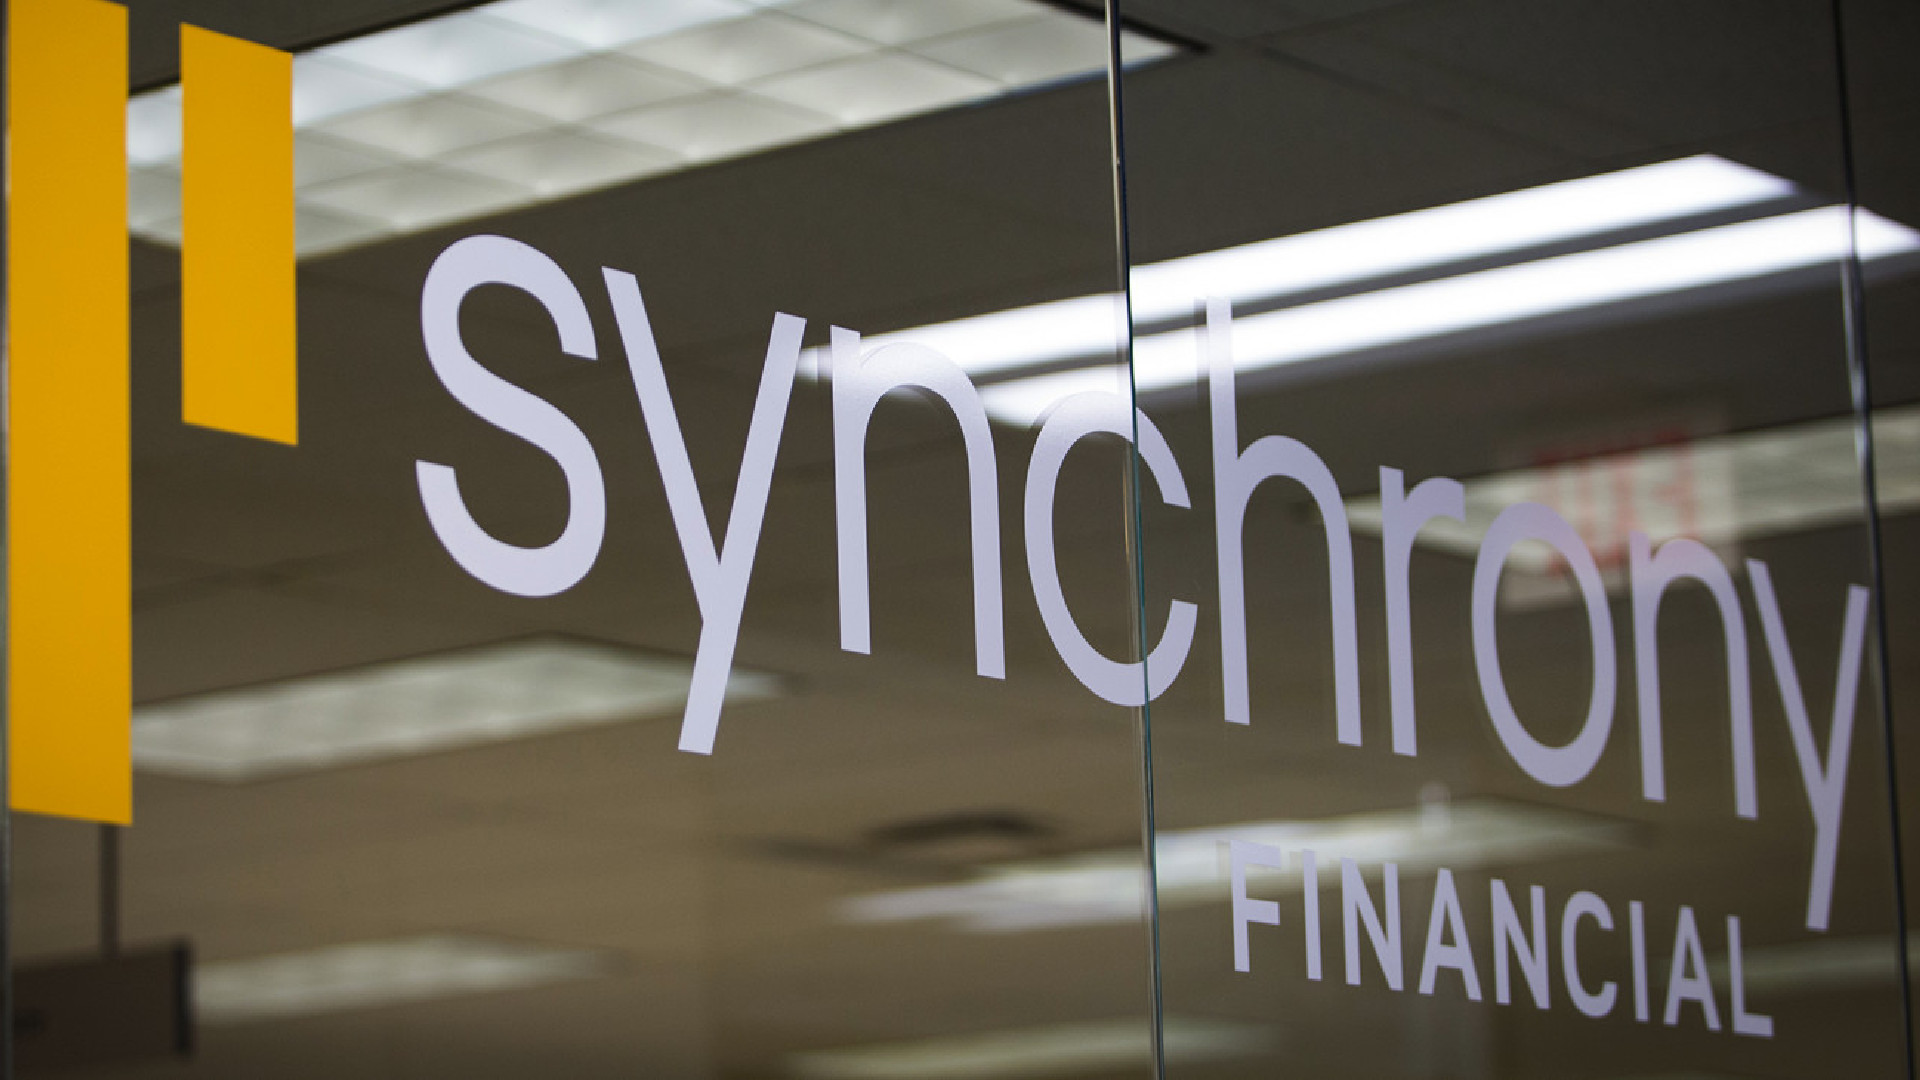 Why You Should Never Work with Synchrony Bank Part II - The Follow-Up | THE BIG RANT